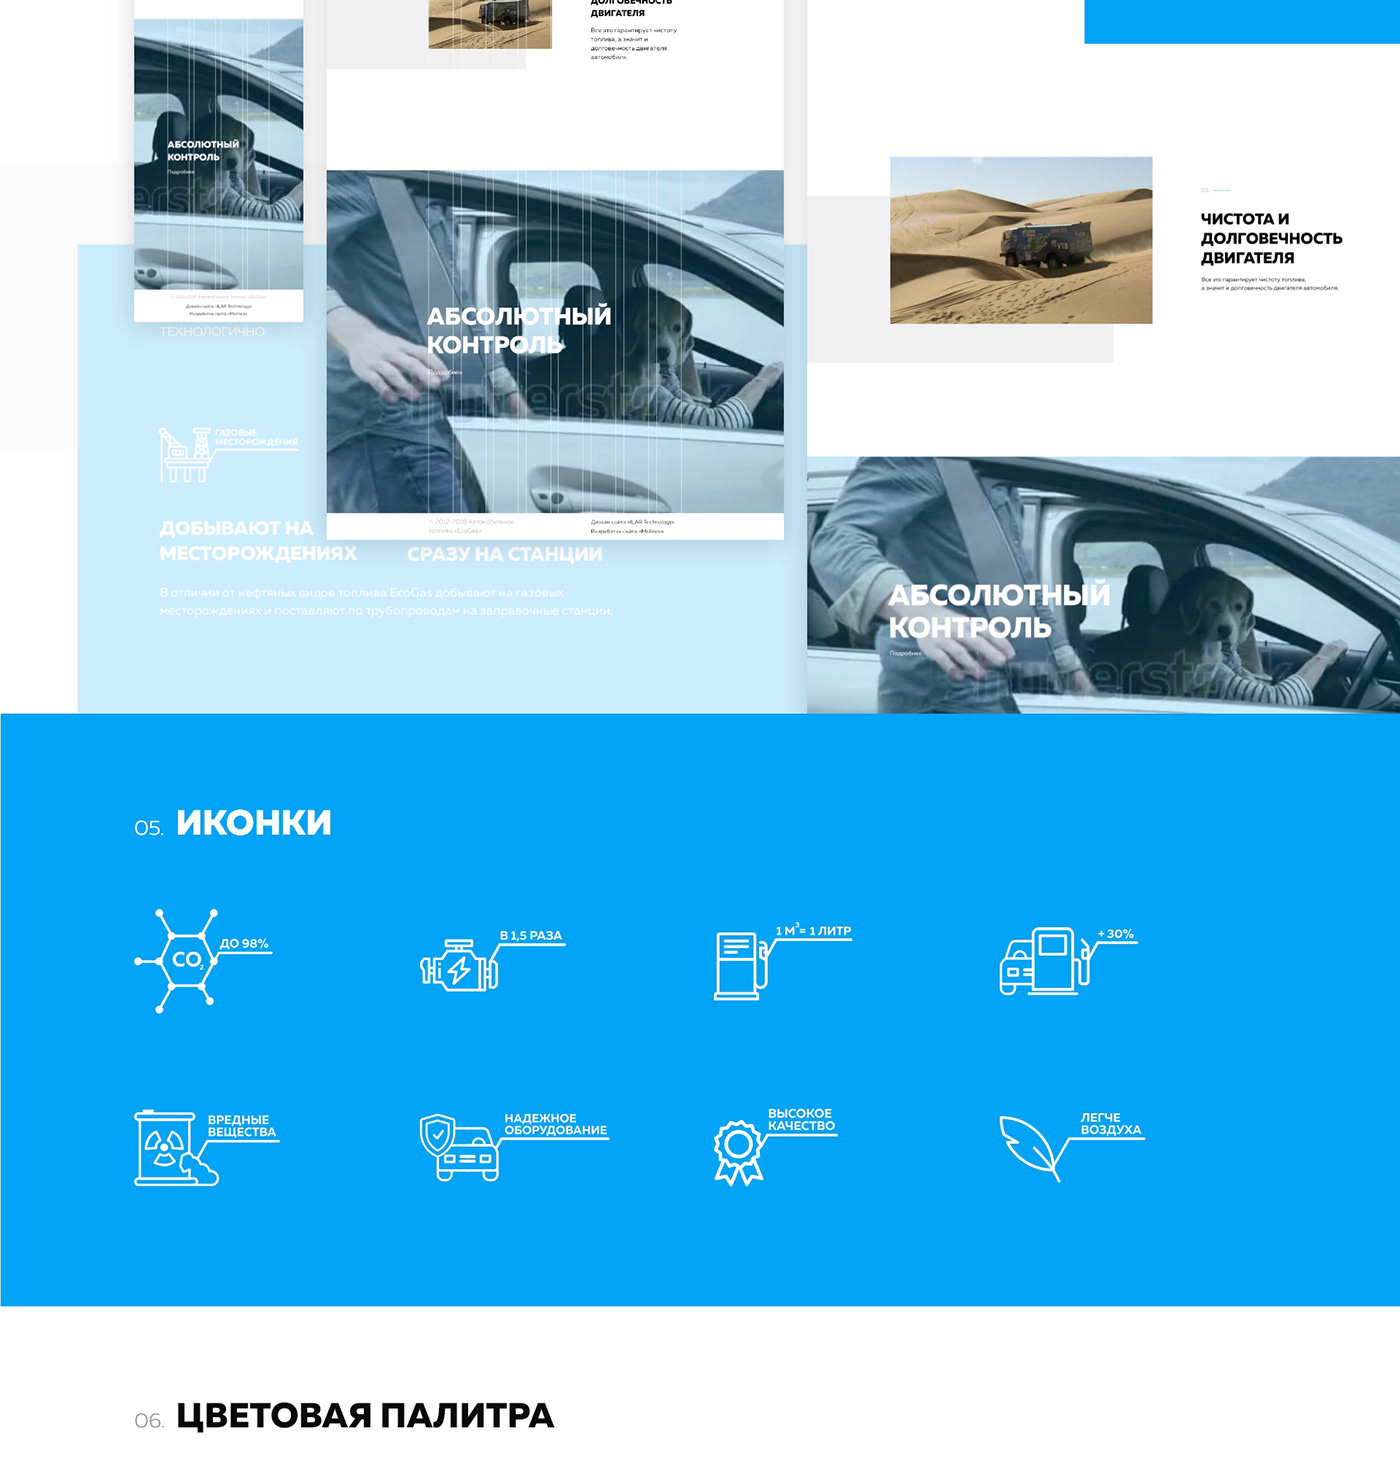 ecogas gasprom Project future innovation interaction promo UI ux Website